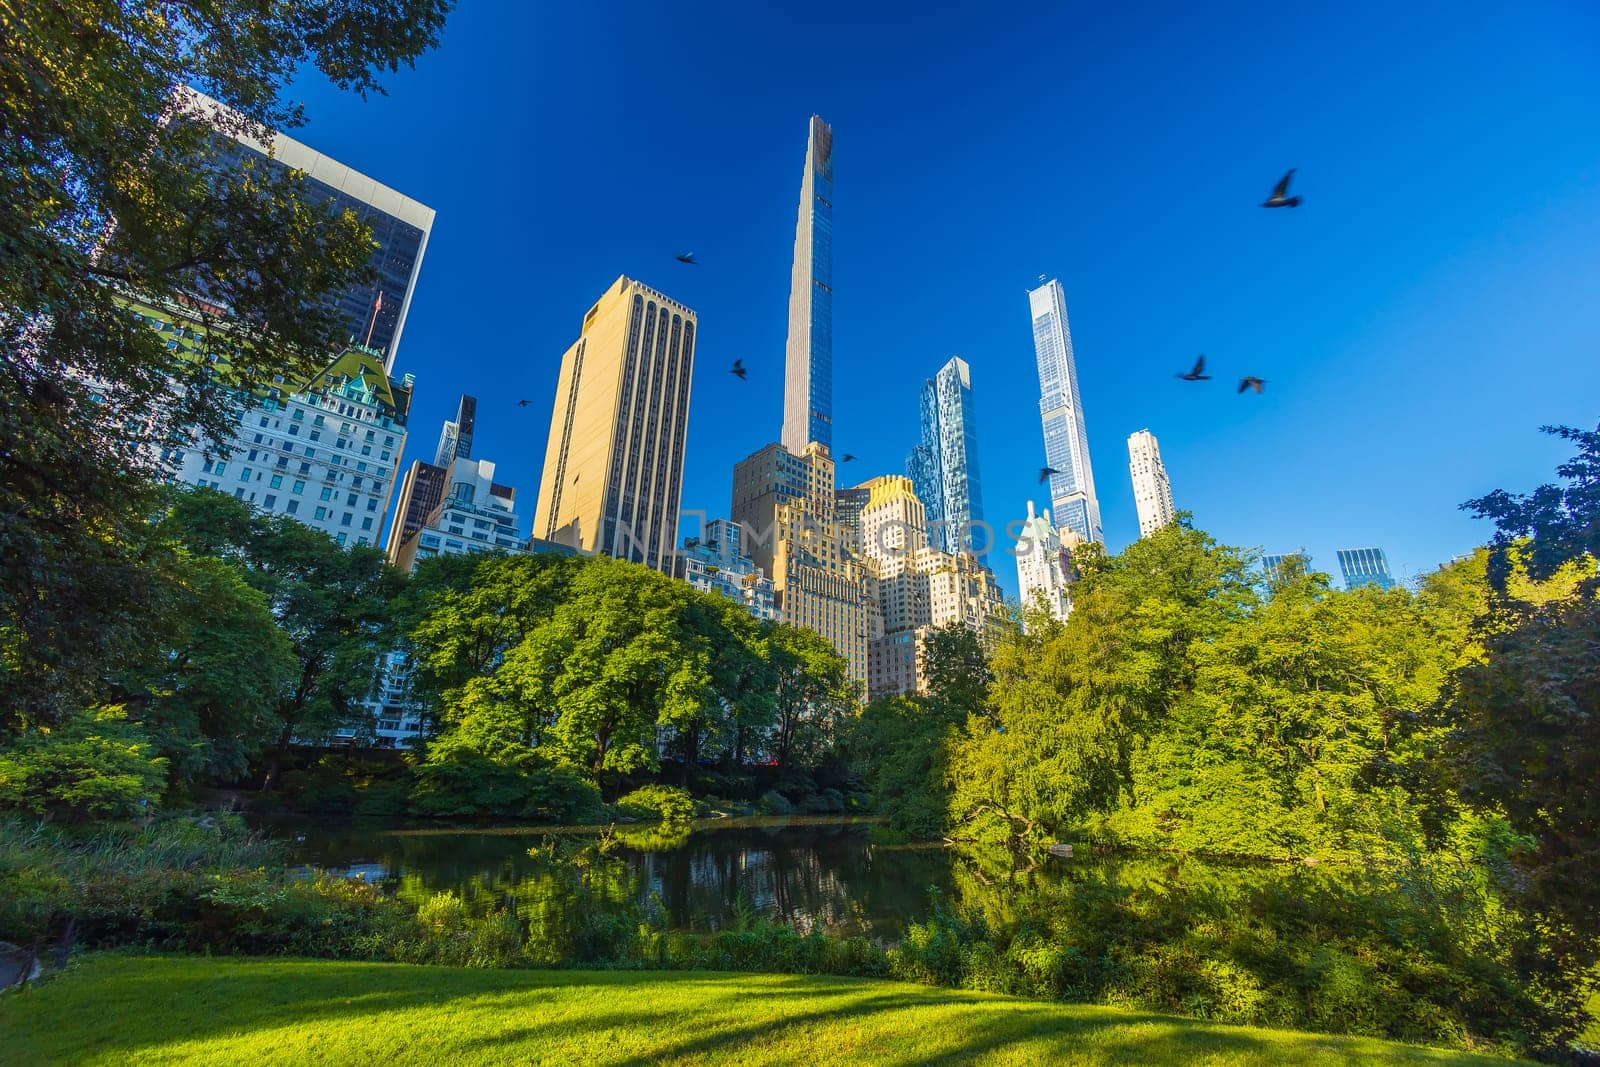 Central Park with Manhattan city skyline, cityscape of New York City USA in summer